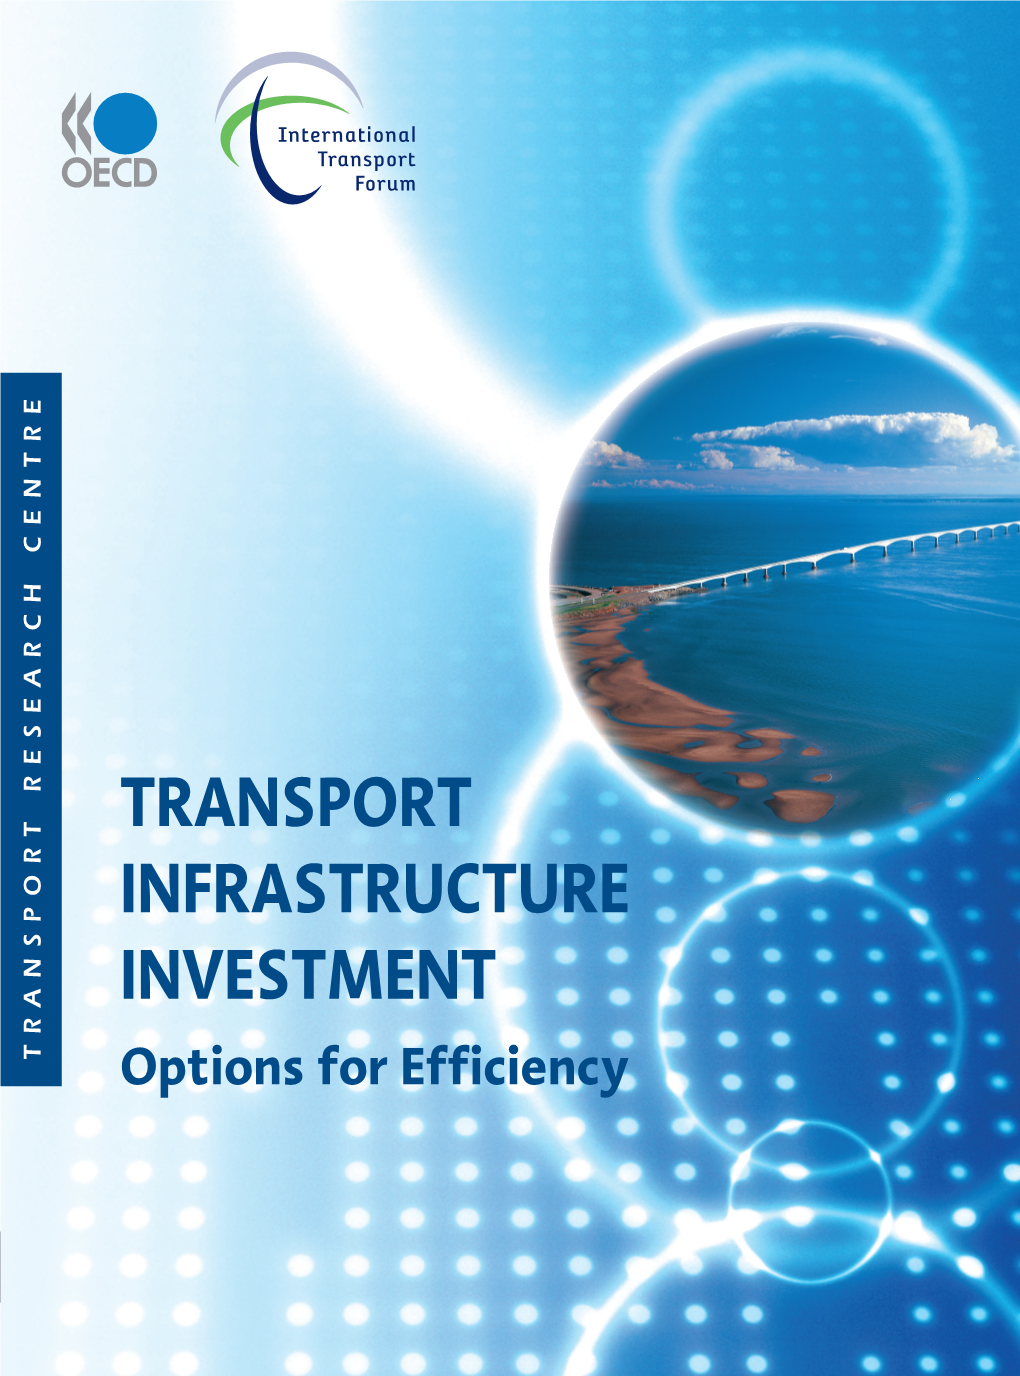 Transport Infrastructure Investment. Options for Efficiency